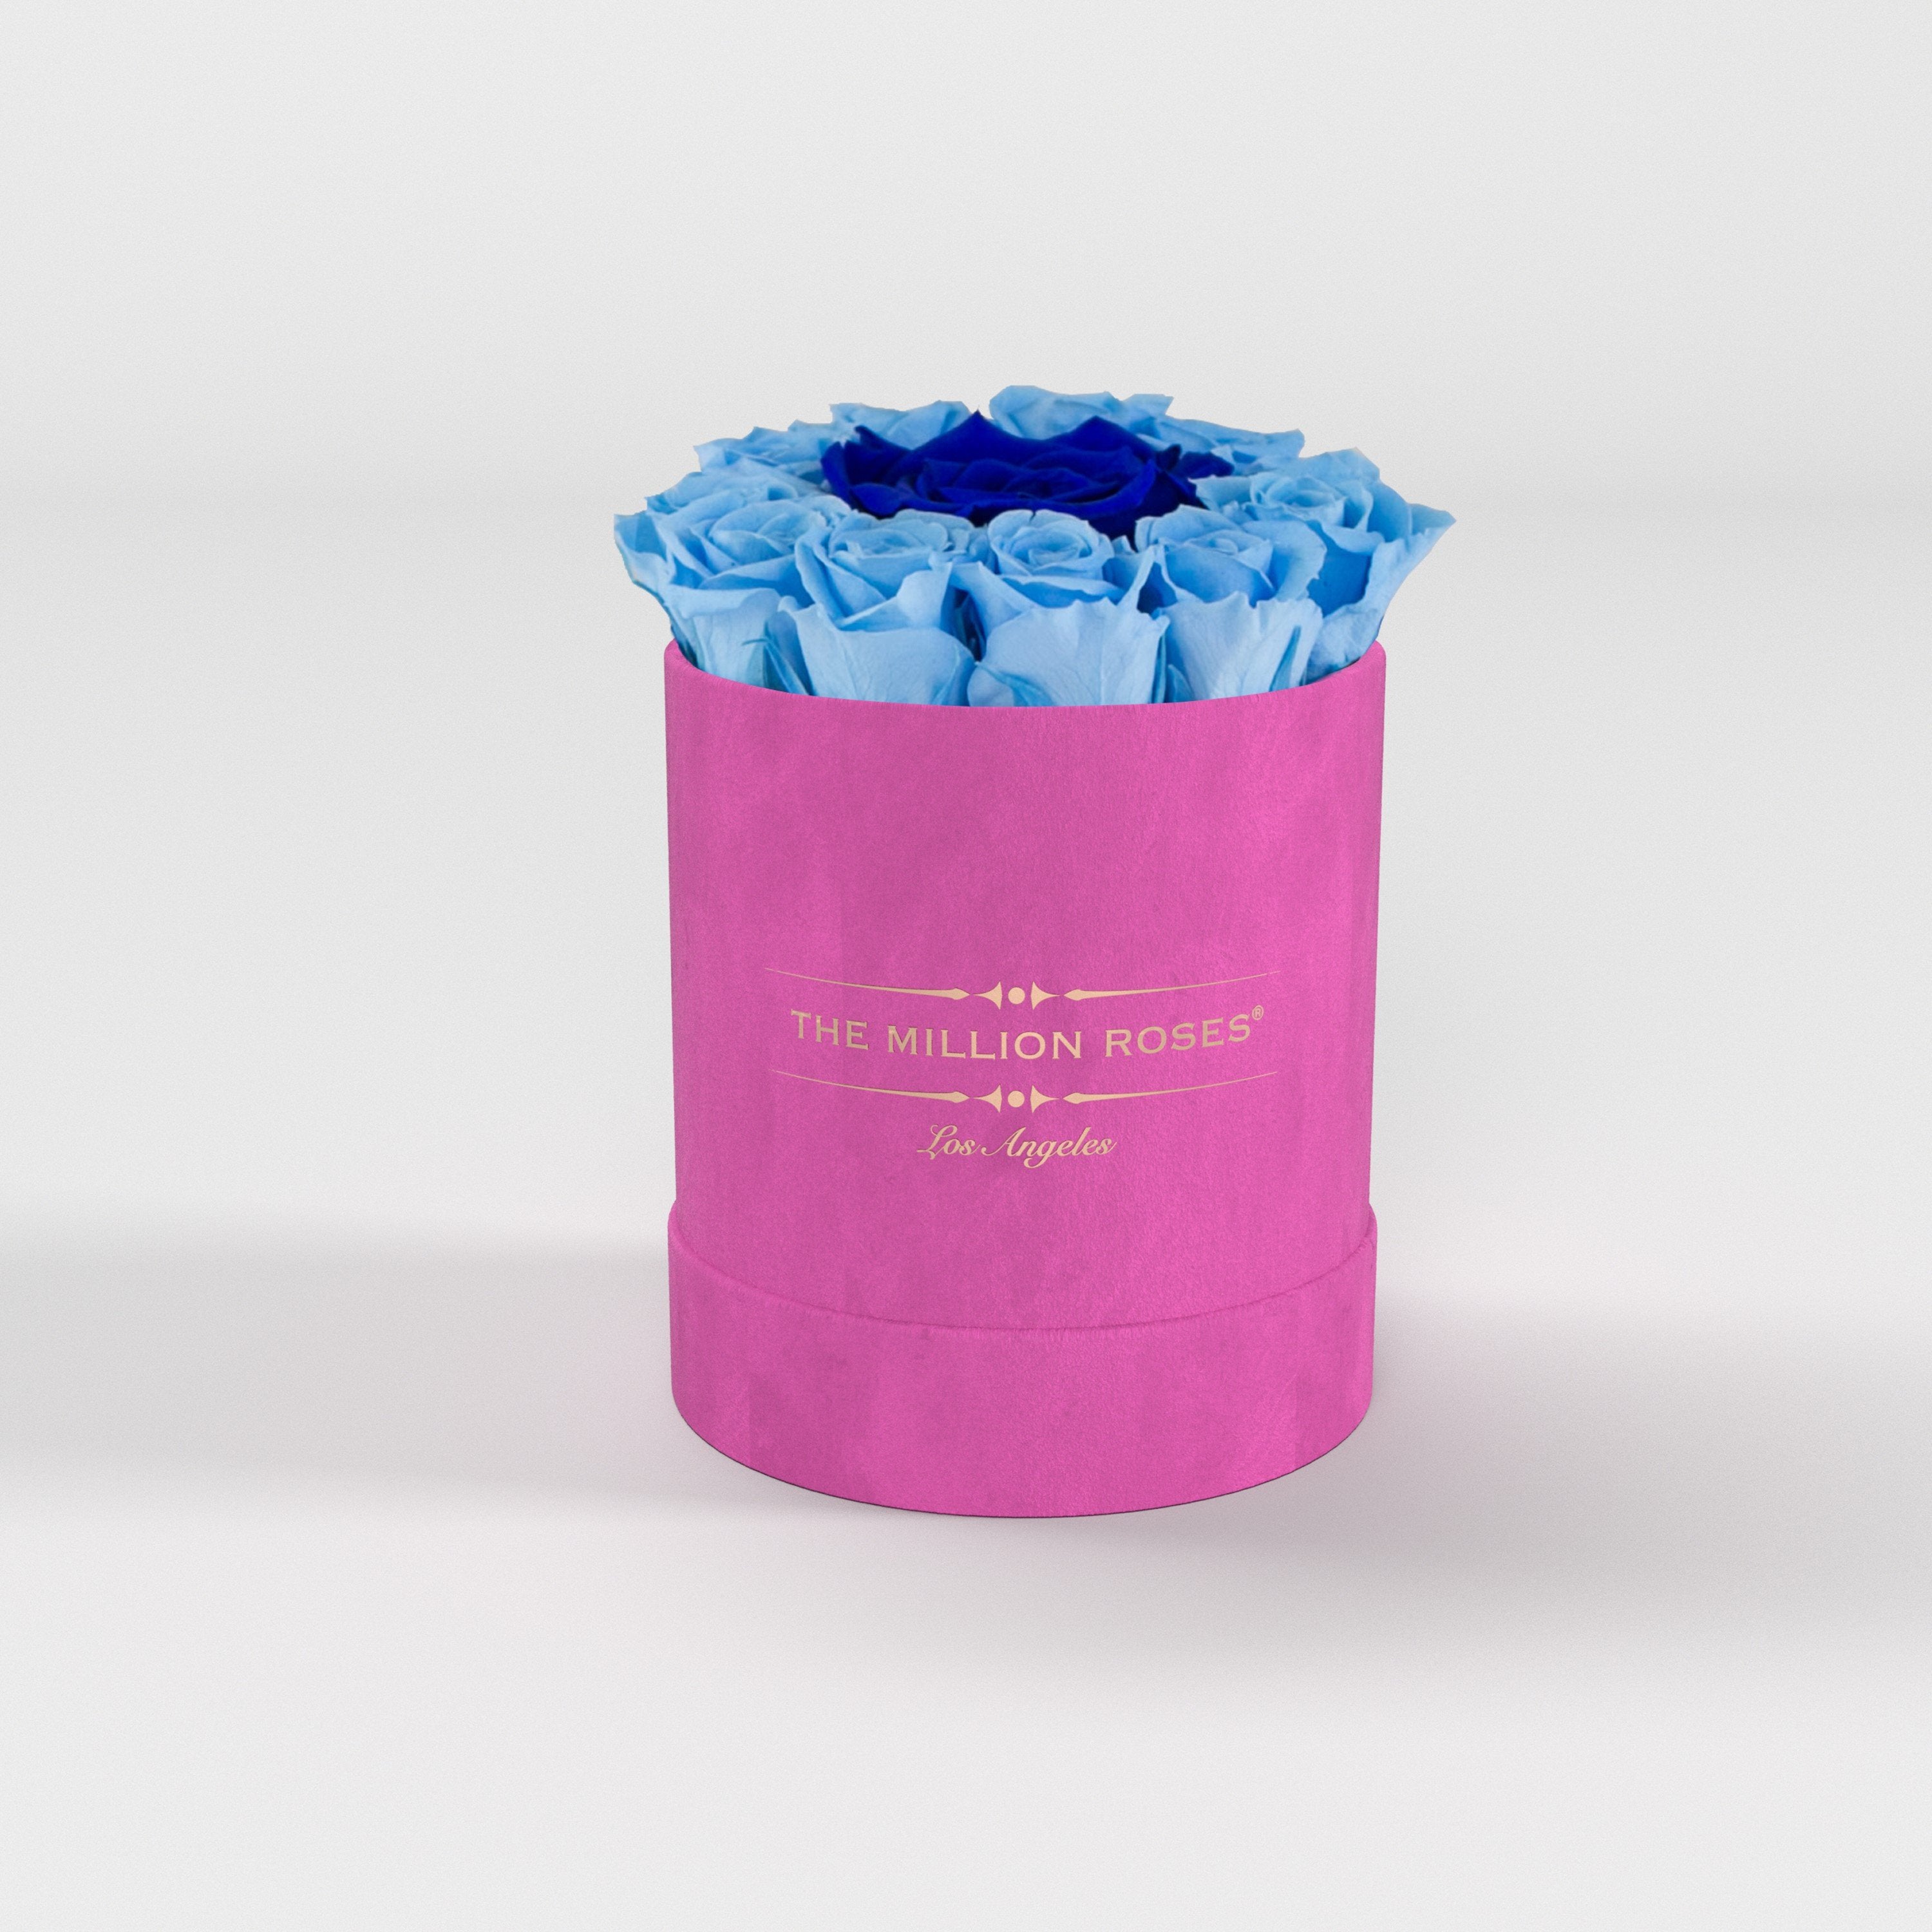 basic round box - hot-pink suede (LA) light-blue mini + 1 rose in middle blue roses - the million roses